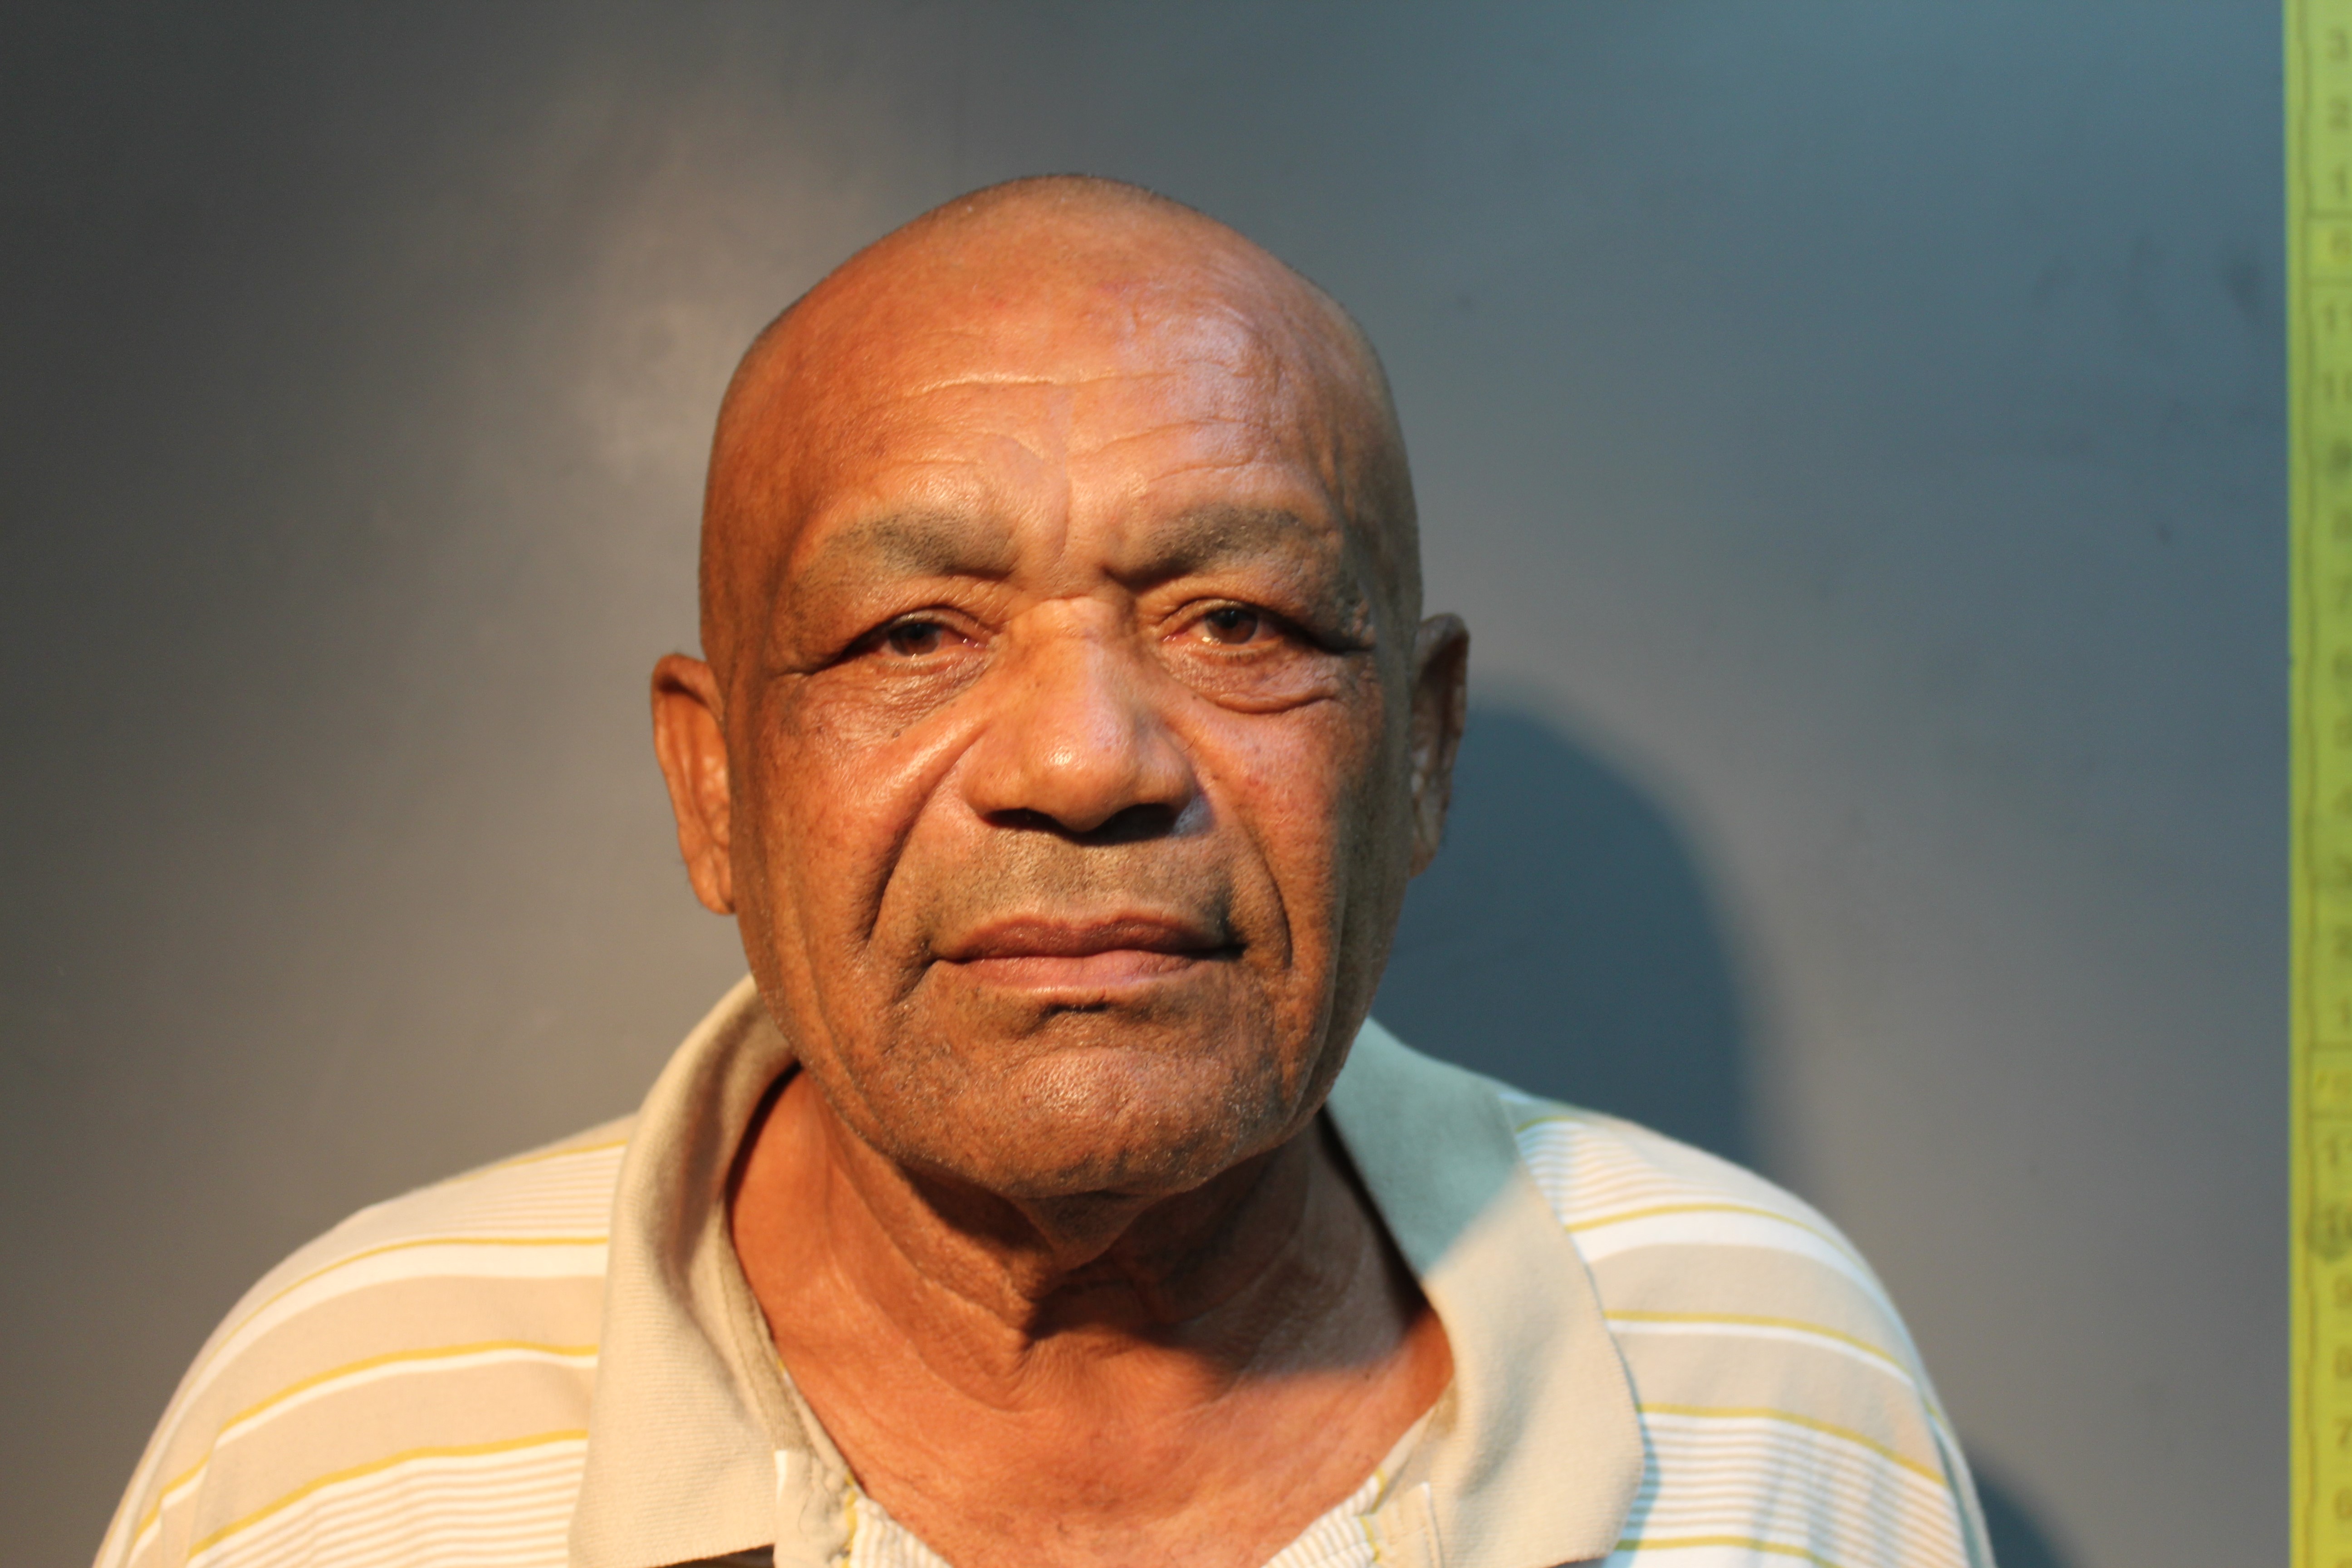 73-Year-Old St. Croix Man Accused Of Rape Of 11-Year-Old Girl In His Household